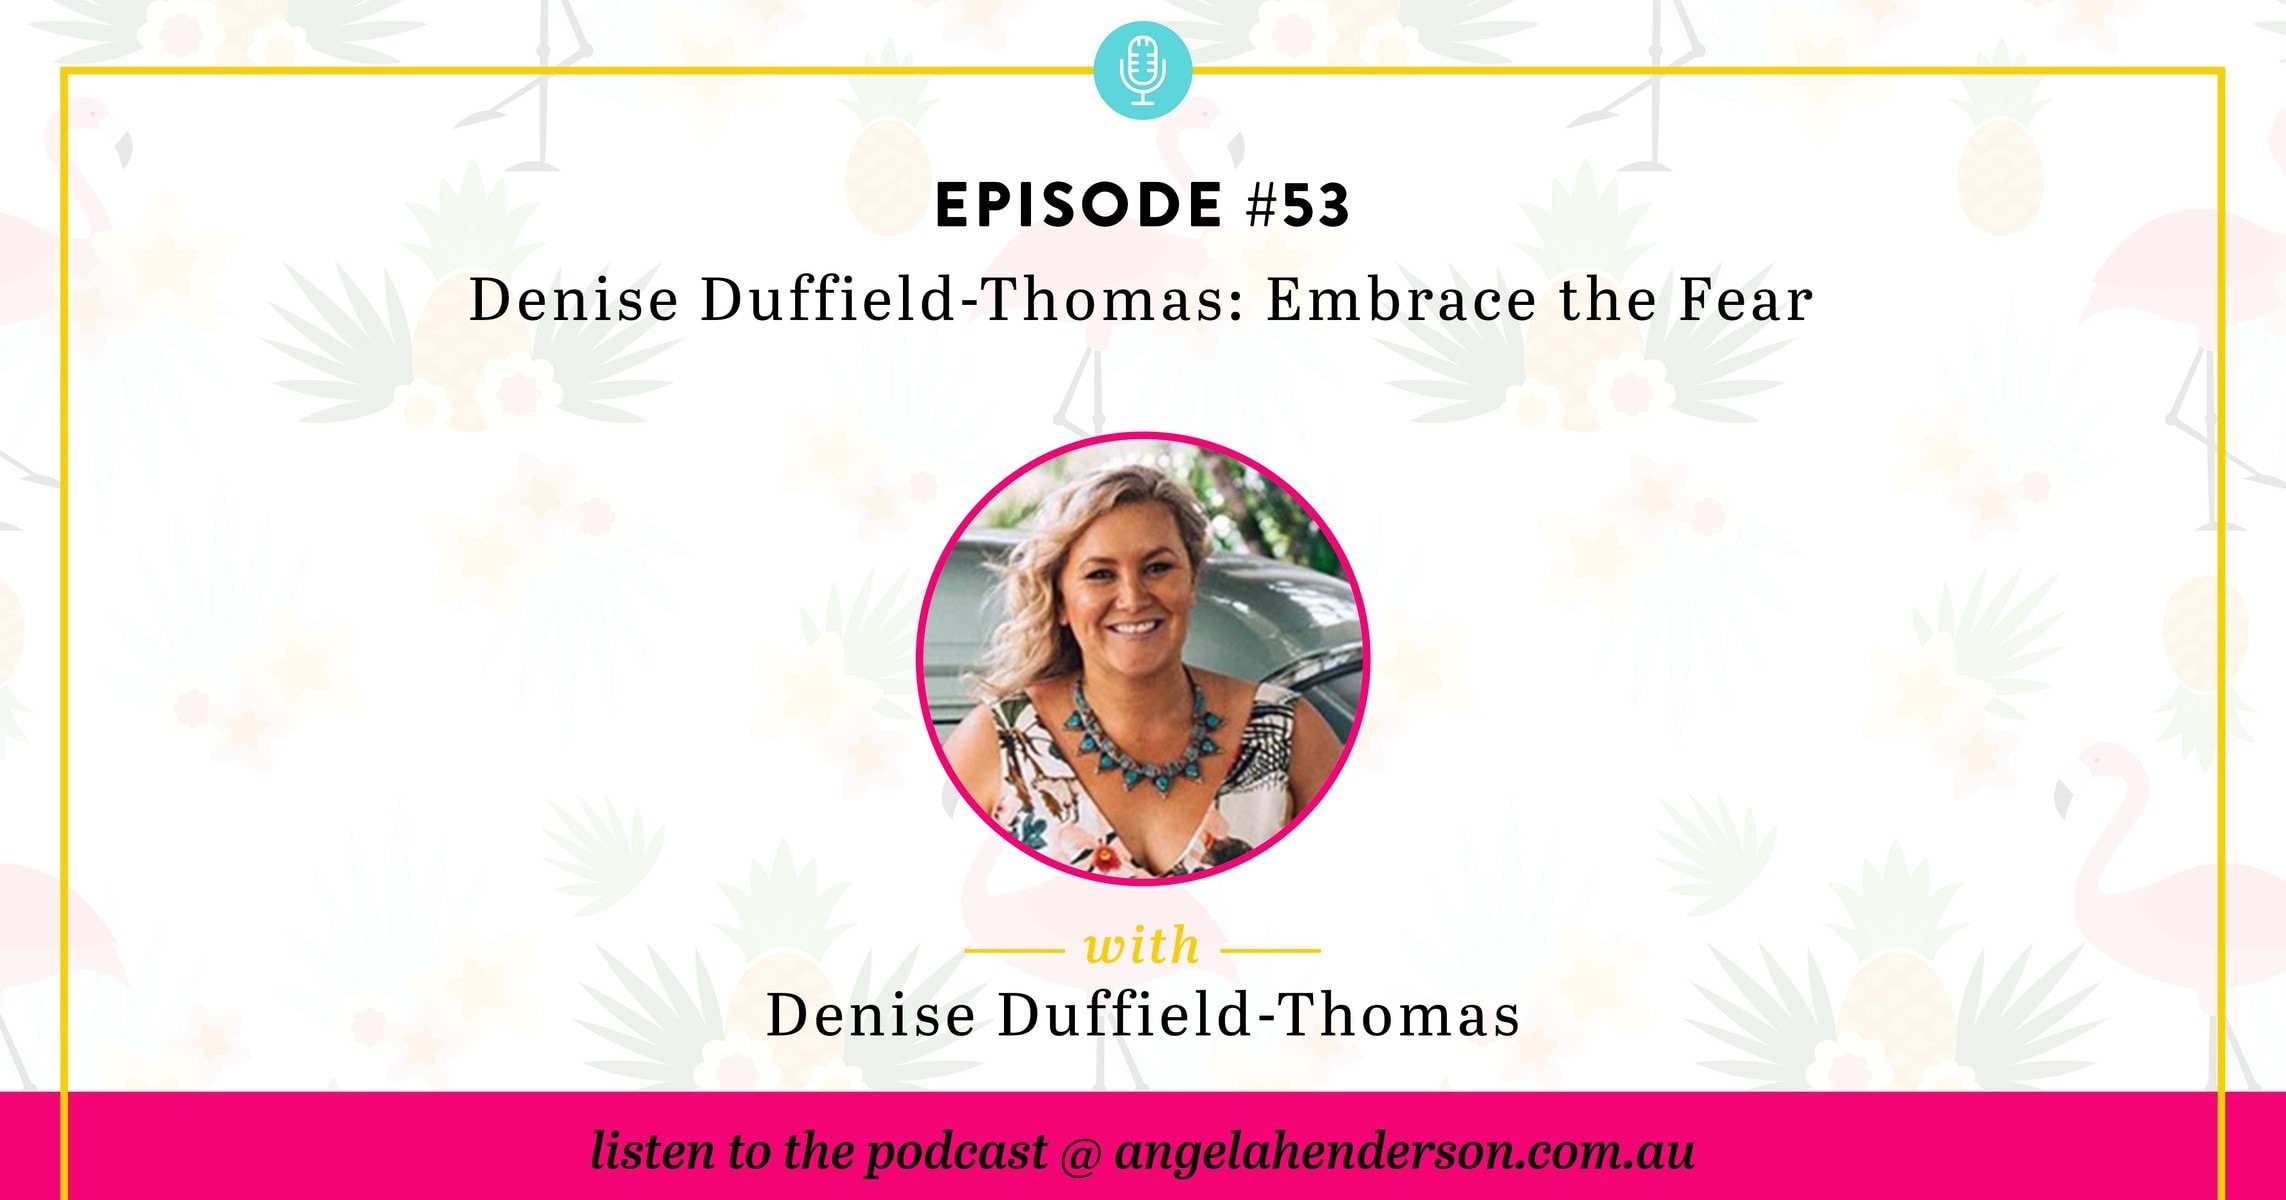 Denise Duffield-Thomas: Embrace the Fear